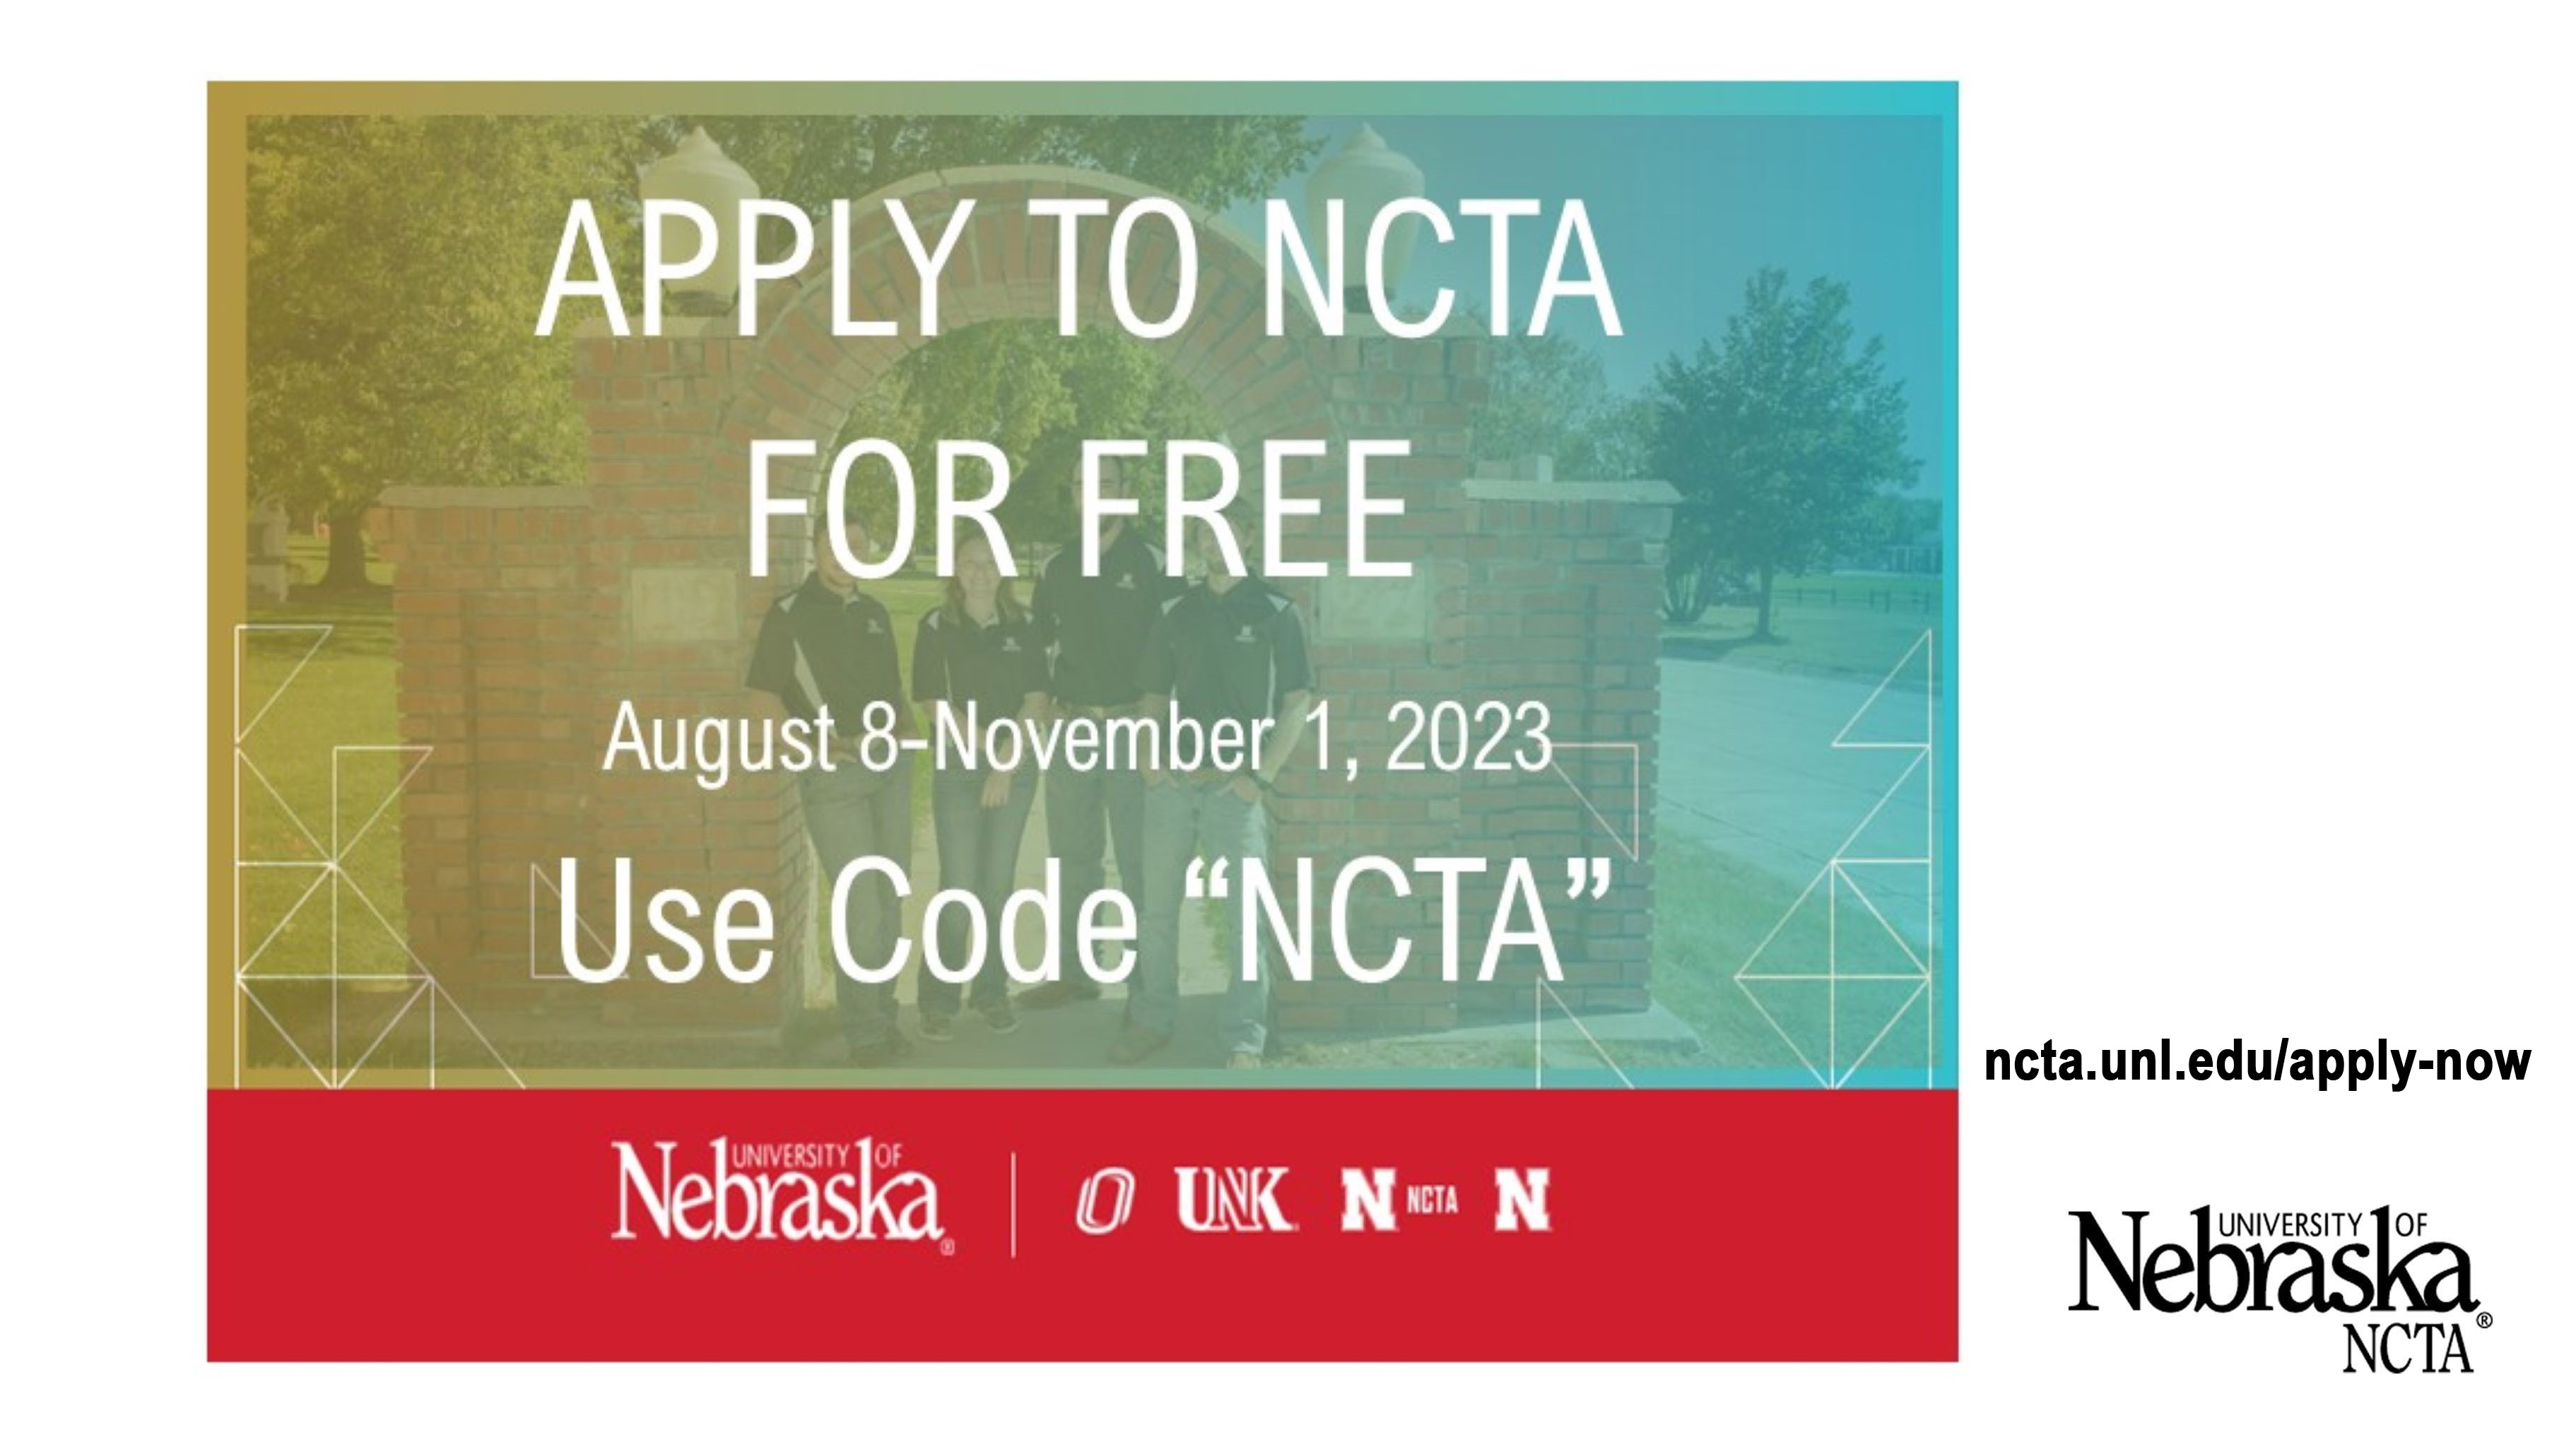 Apply for Free to NCTA until November 1, 2023 with code "NCTA".